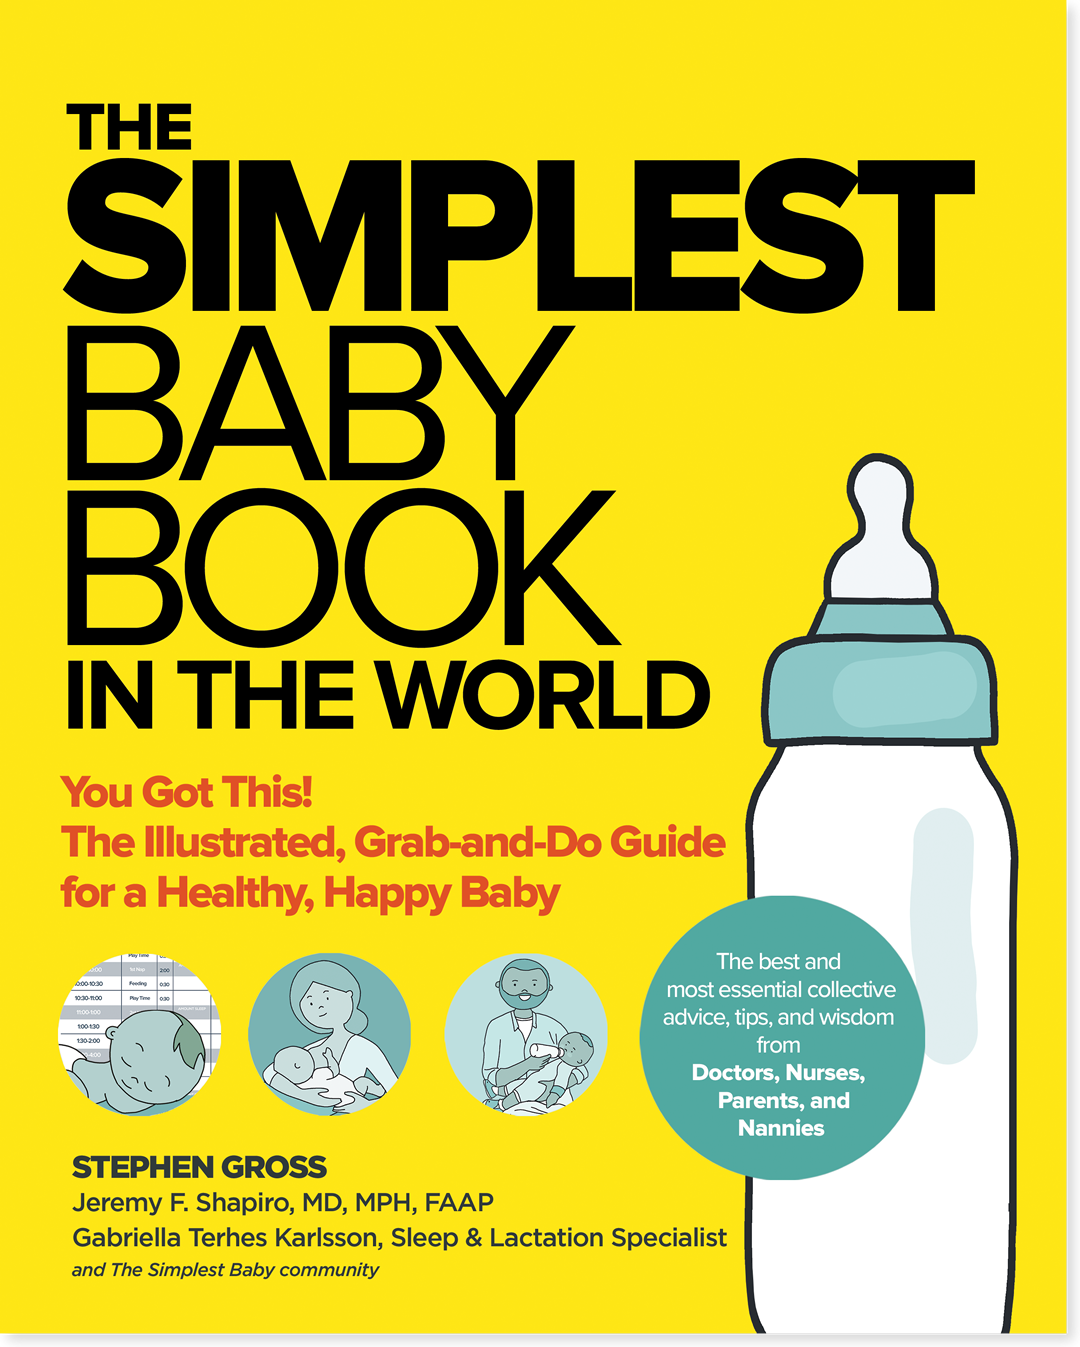 https://simplestbaby.com/wp-content/uploads/2021/06/Simplest-Baby-Cover-1.png